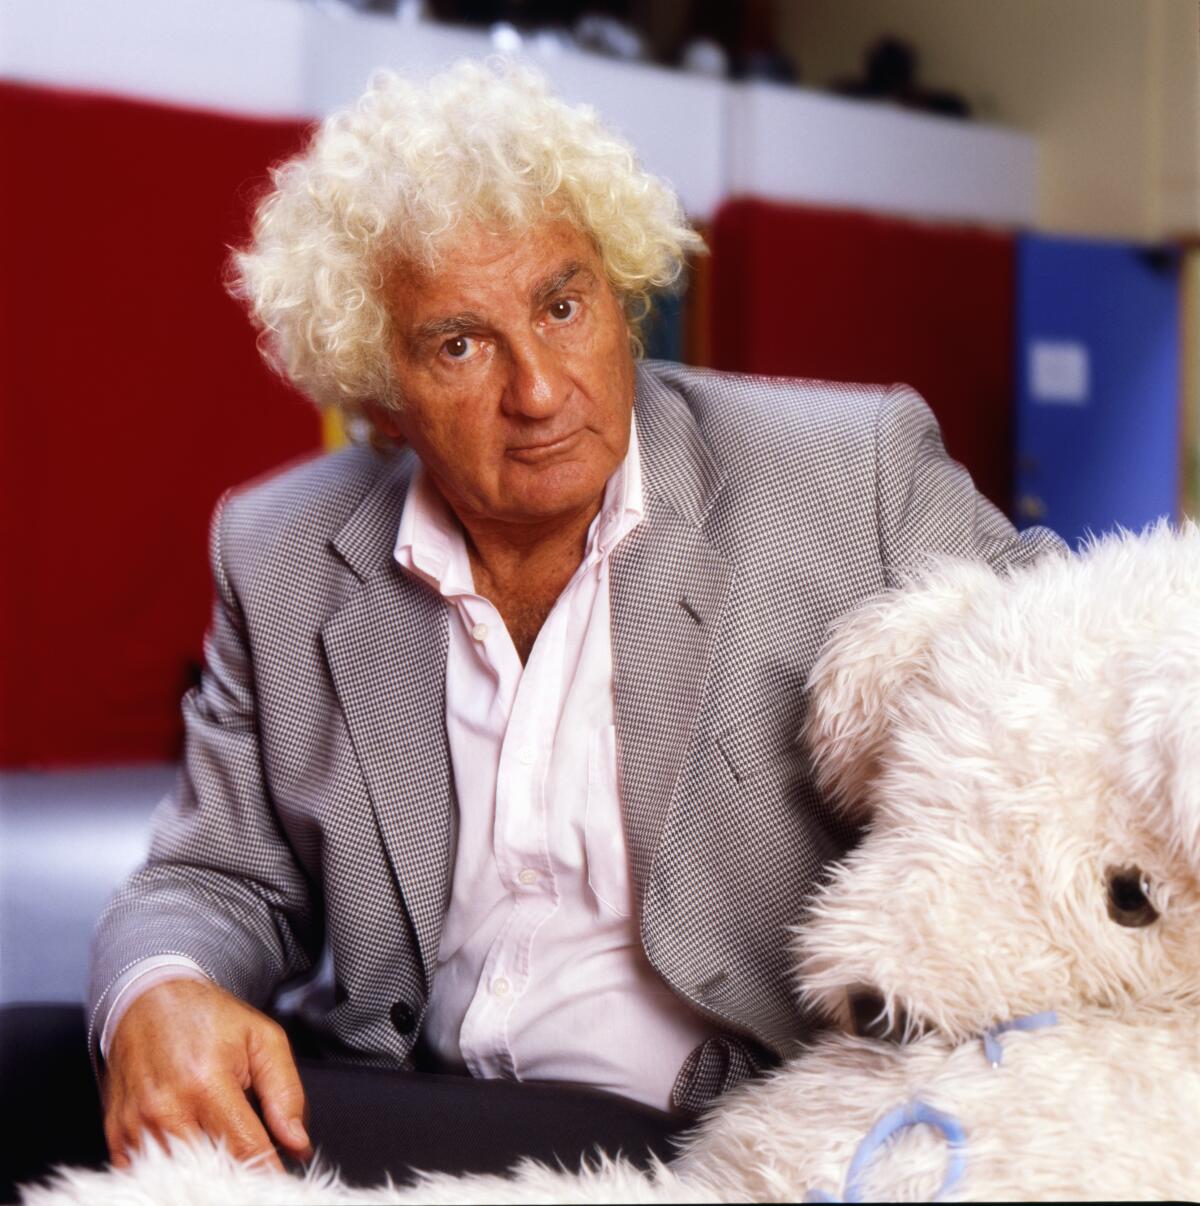 Arthur Janov in a suit next to a stuffed animal. 